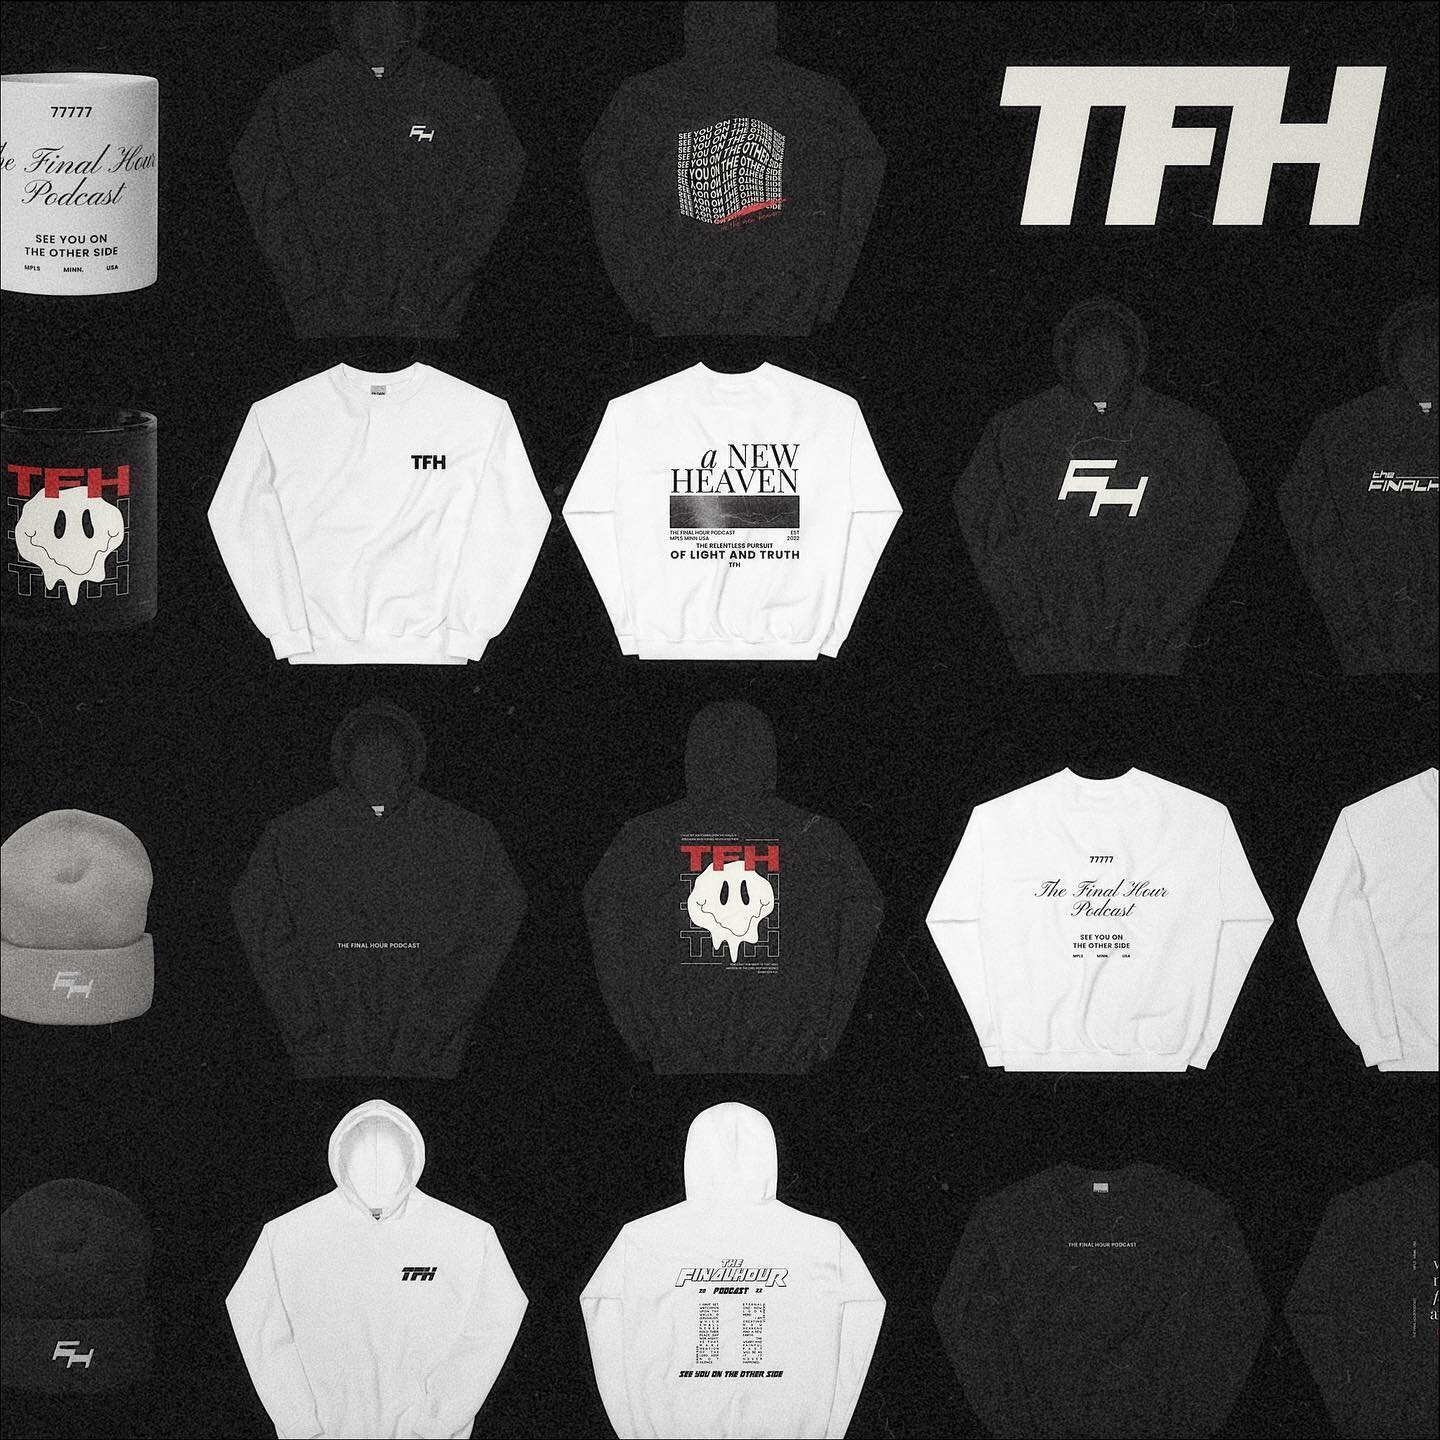 We bring good tidings 🖤👽

TFH merch is now available to order on the website. Hoodies, crewnecks, tees, and more! Thank you to our amazing listeners who made this happen. We love you guys!

www.thefinalhourpodcast.com/merch